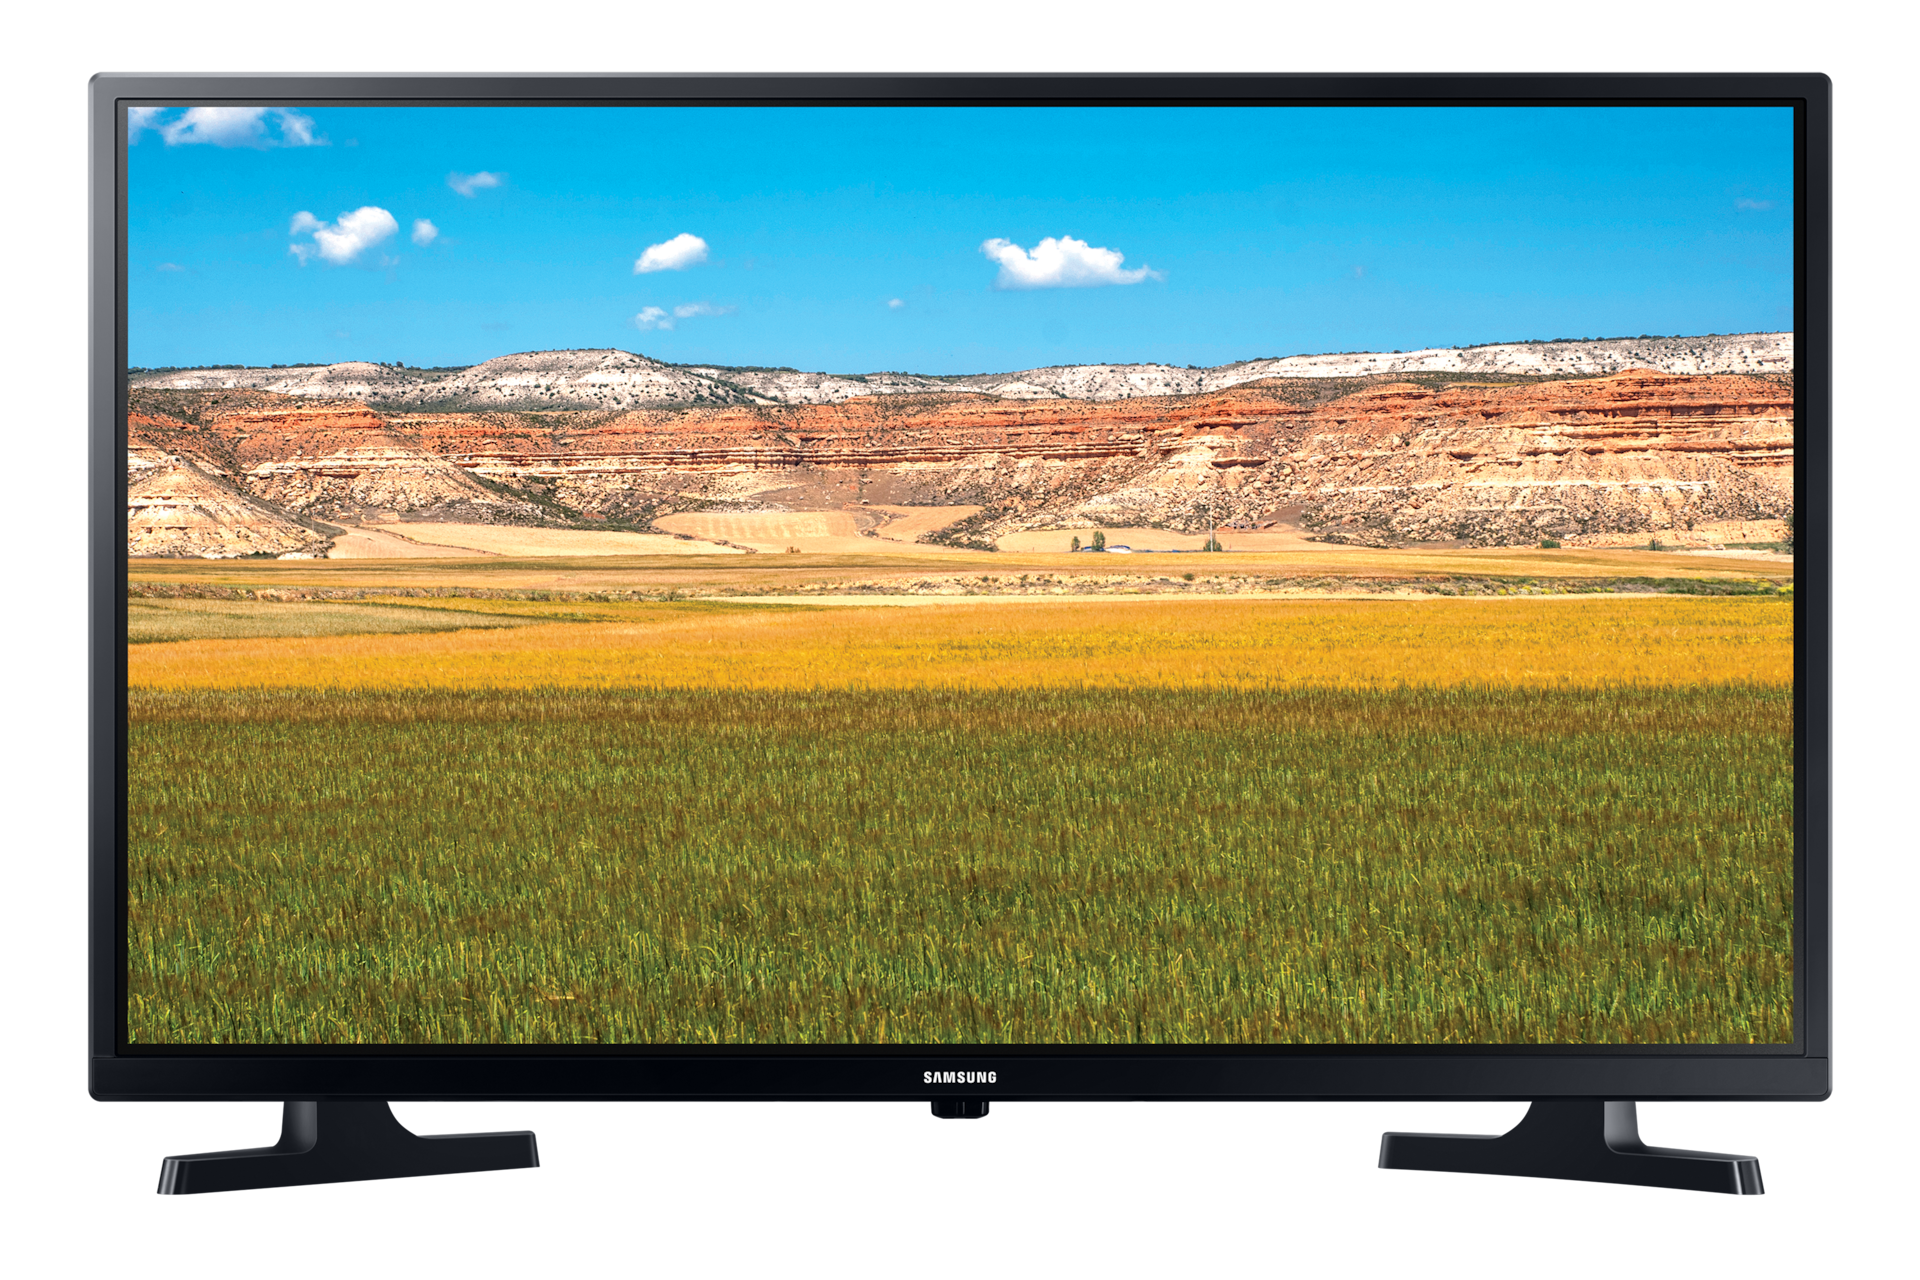 TVs HDTV Enabled 1080p (FHD) Maximum Resolution for sale